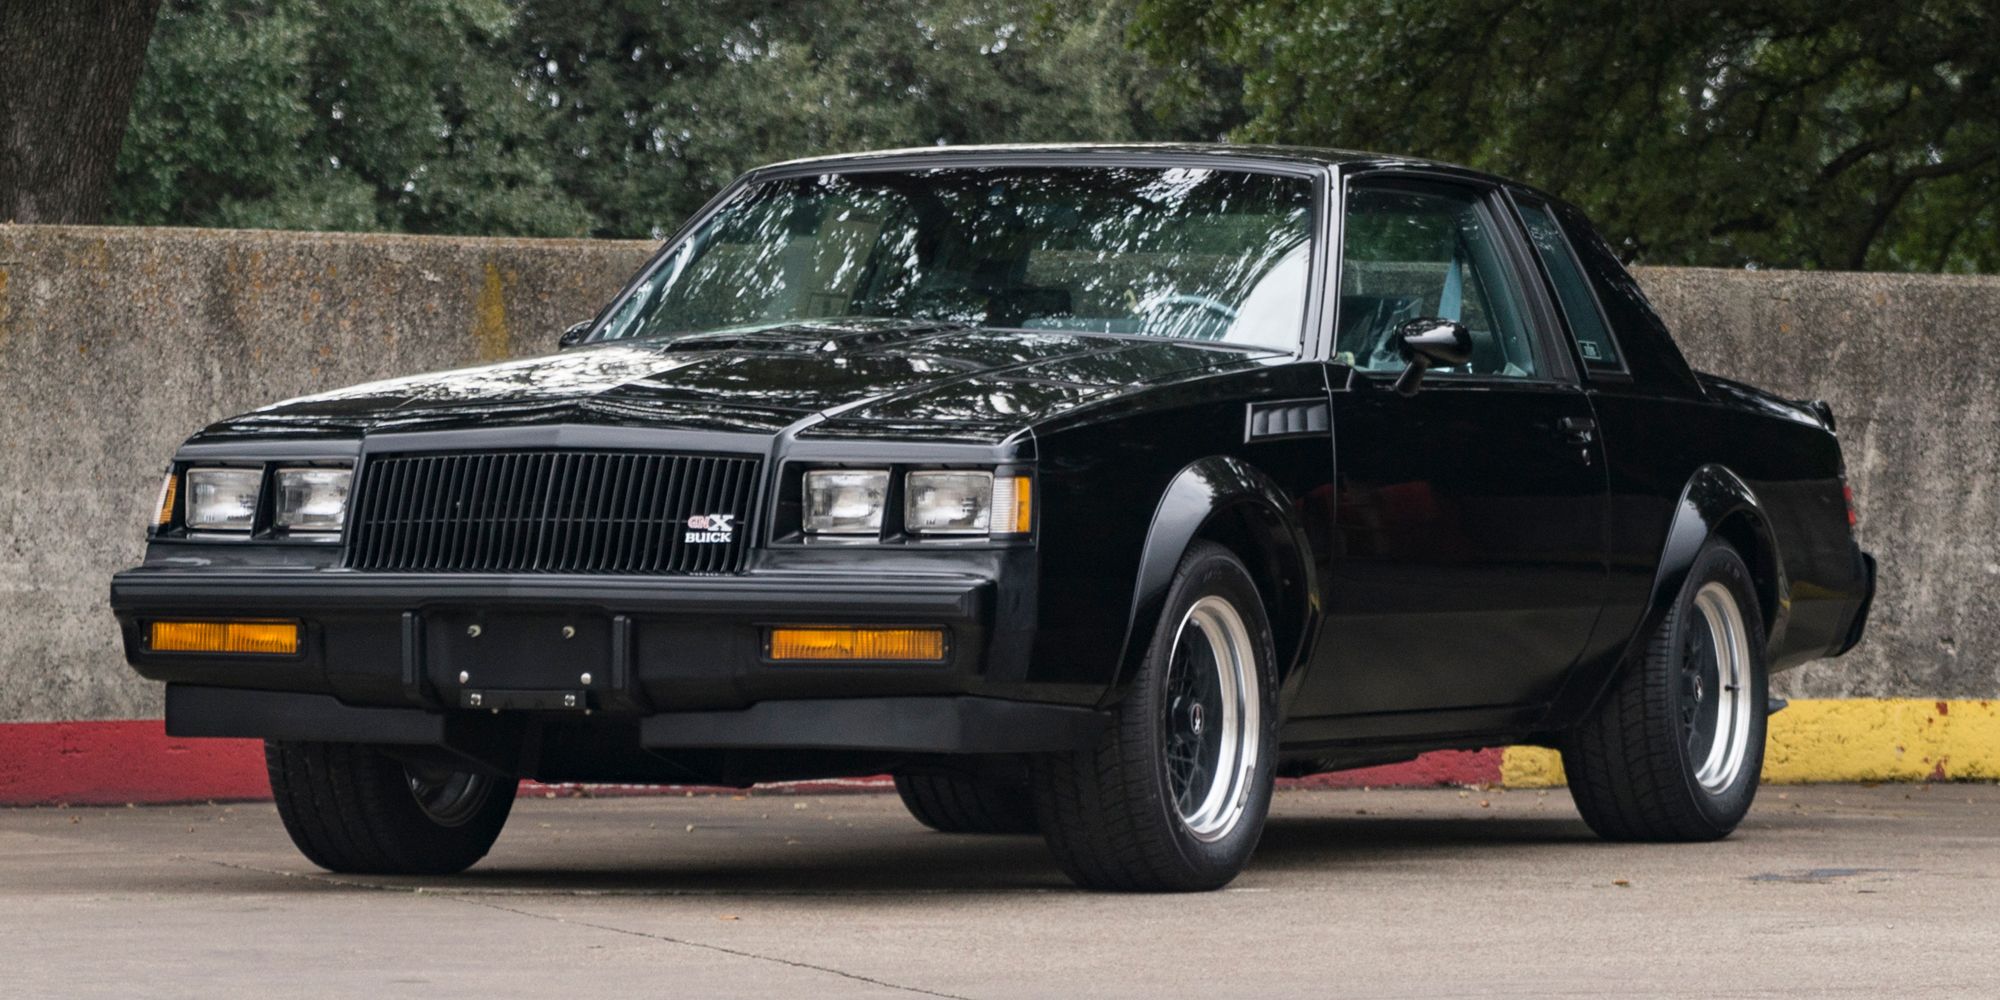 Black 1987 Buick GNX Parked